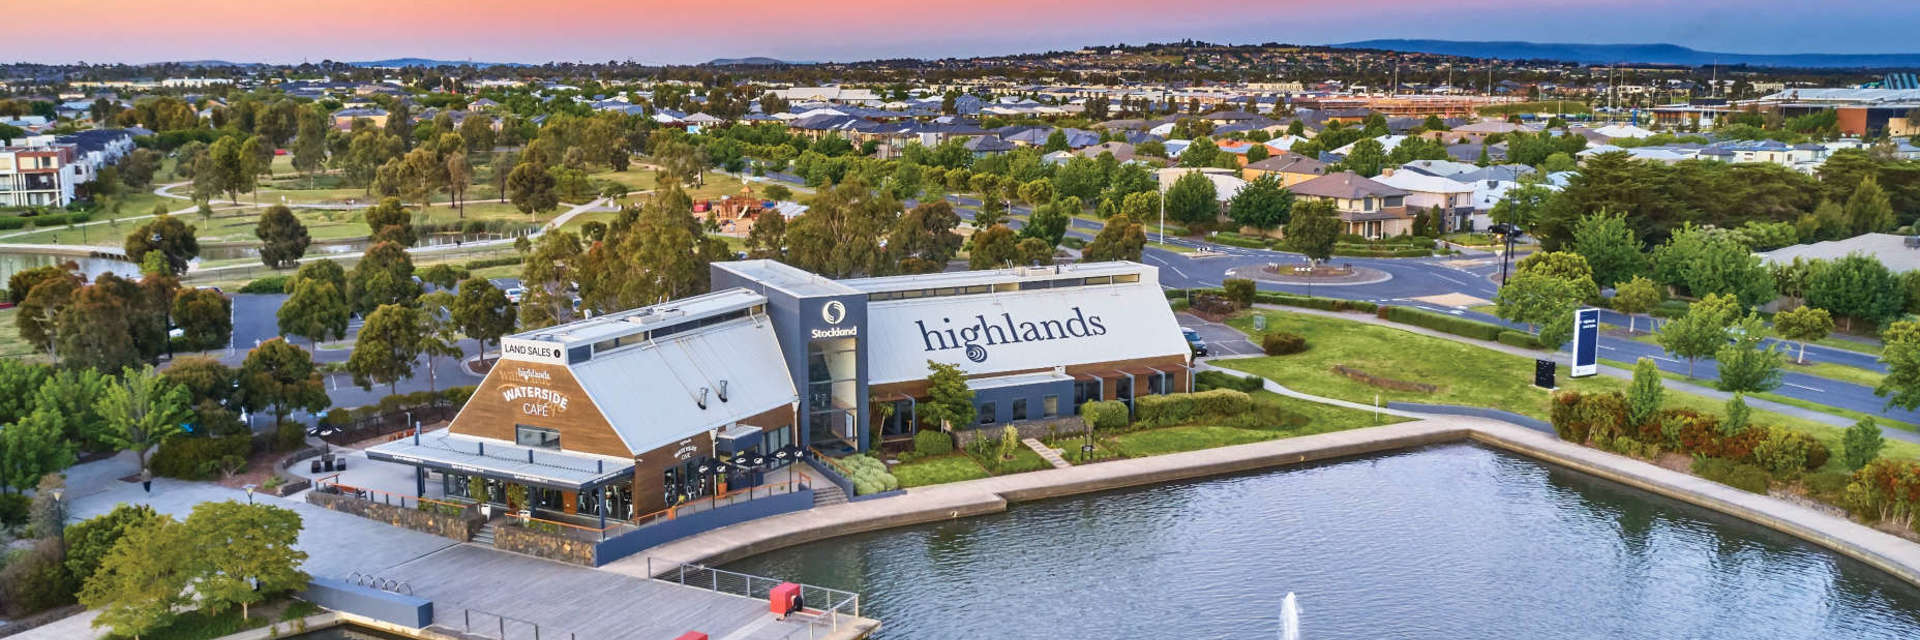 Stockland taking action towards a low-carbon future